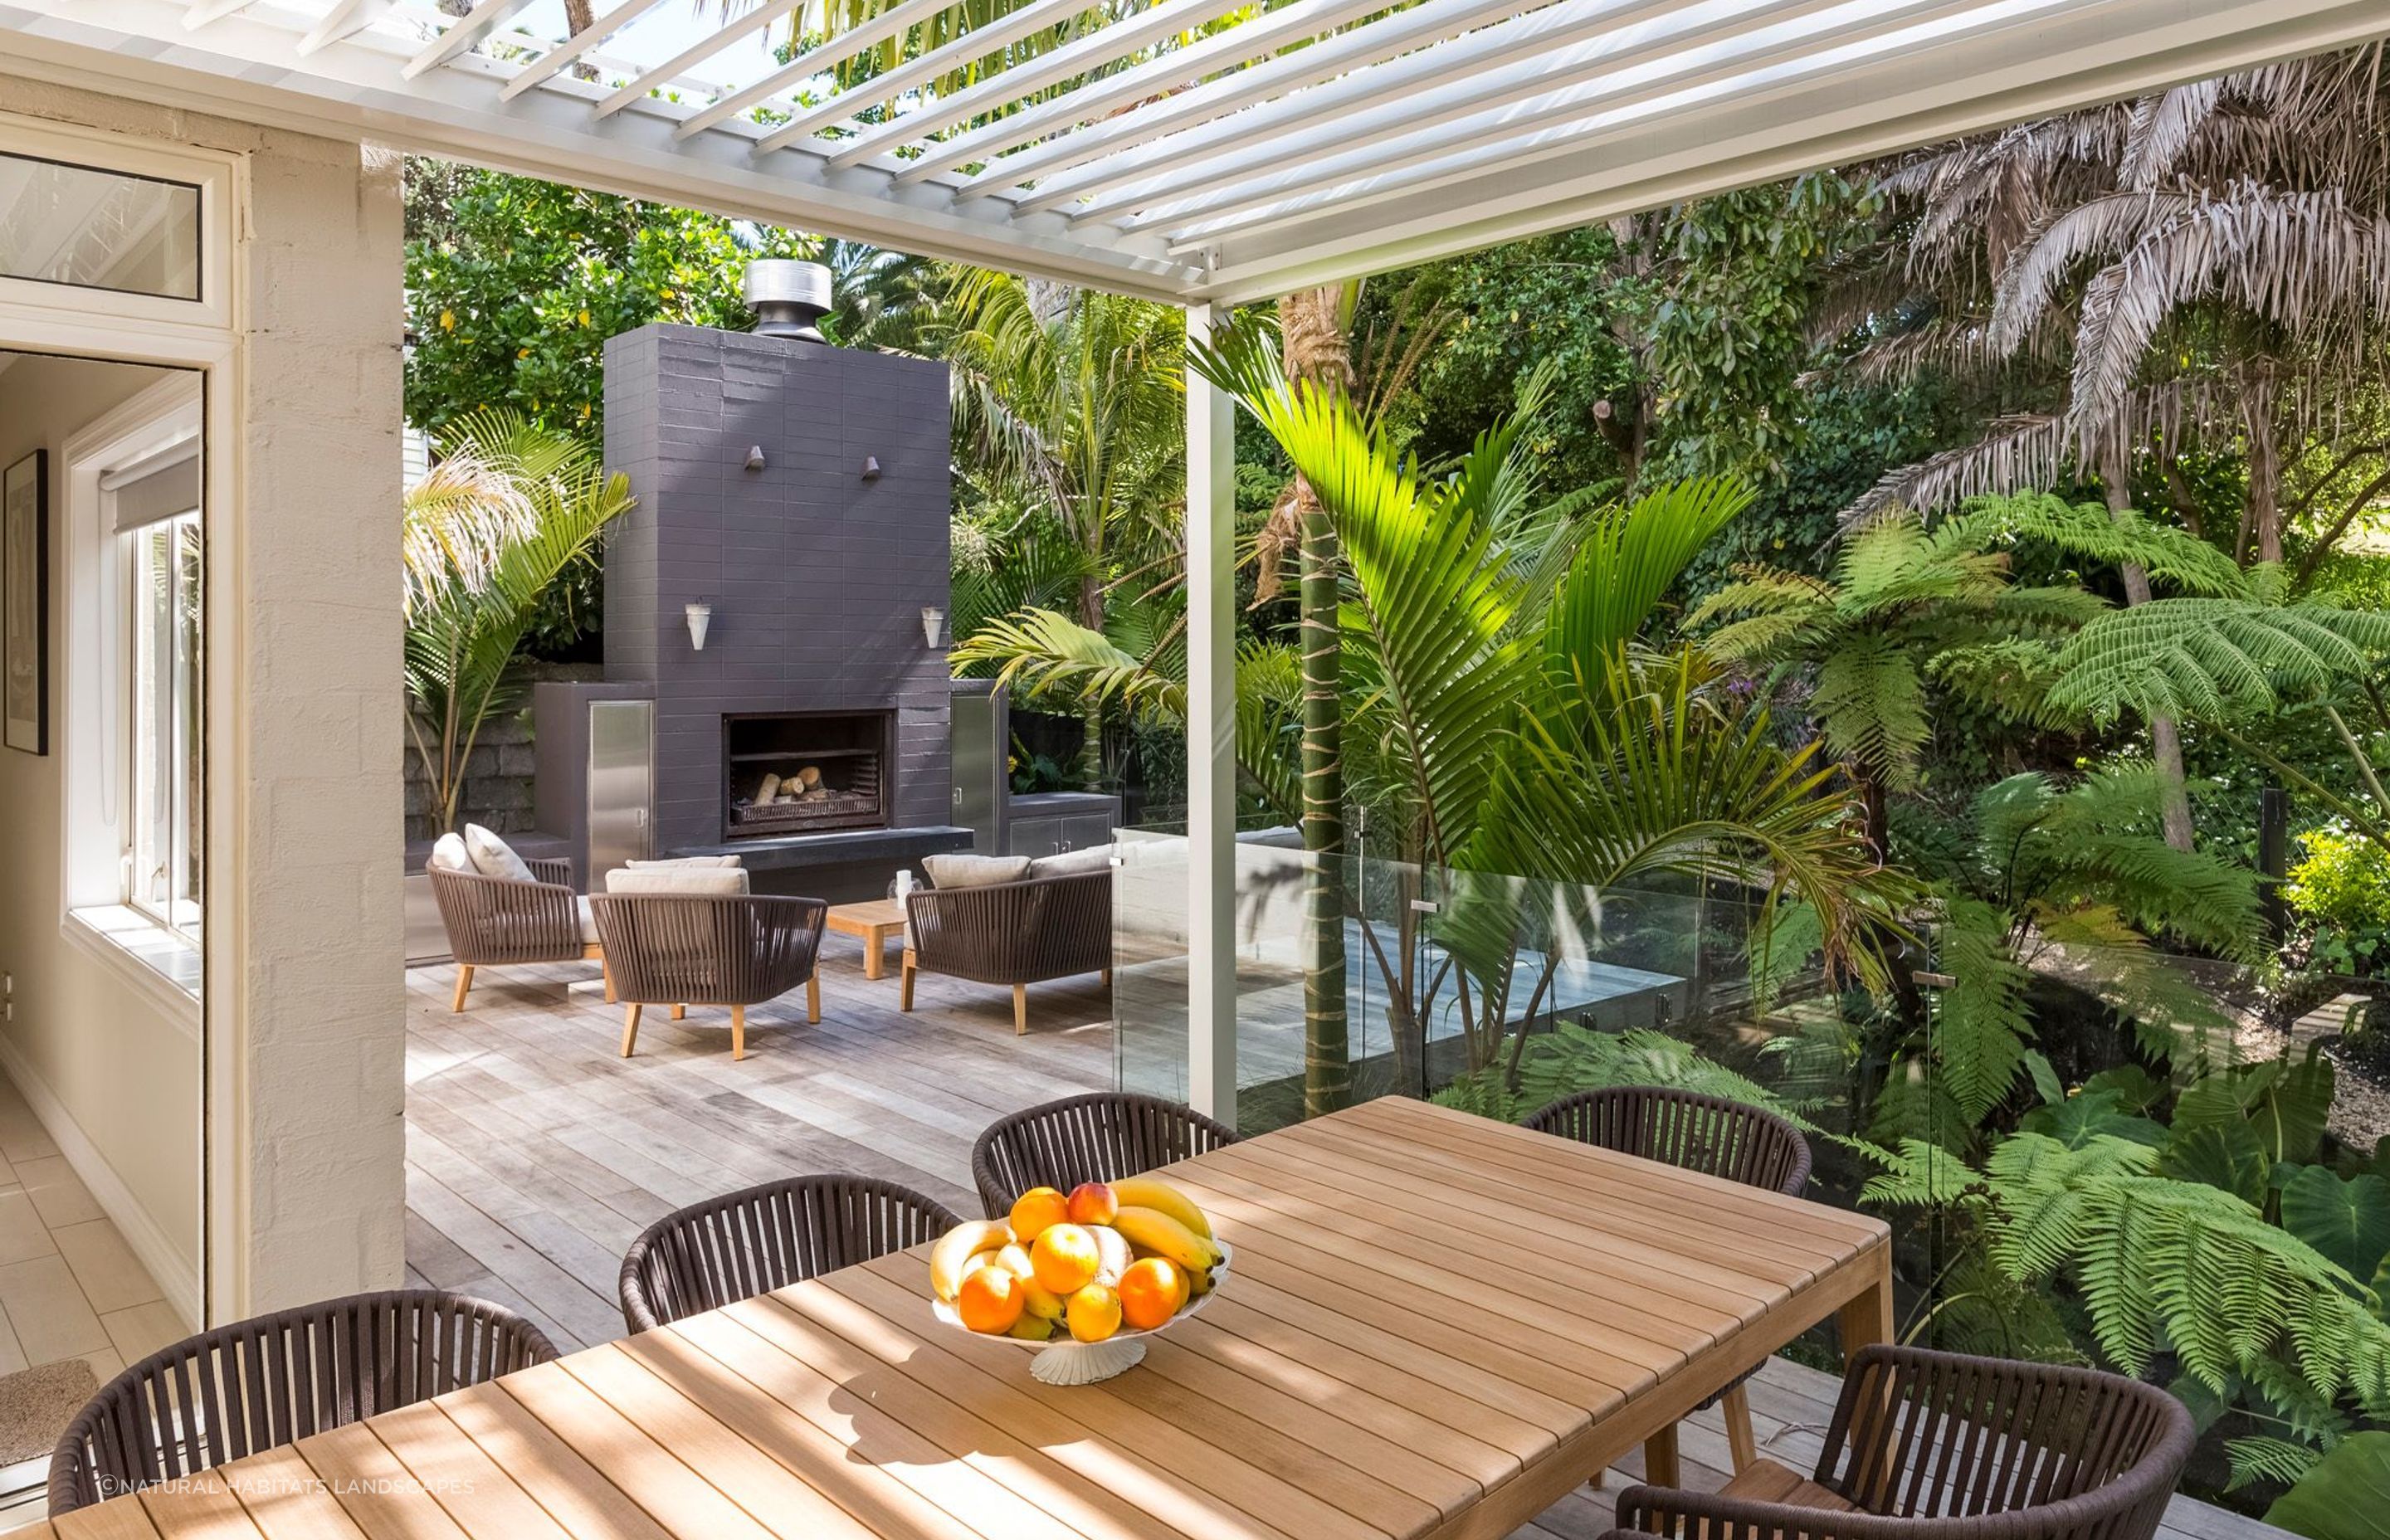 A well-designed outdoor living space, like this one in Remuera, allows you to get the most out of it, even in dense, lush settings like these.